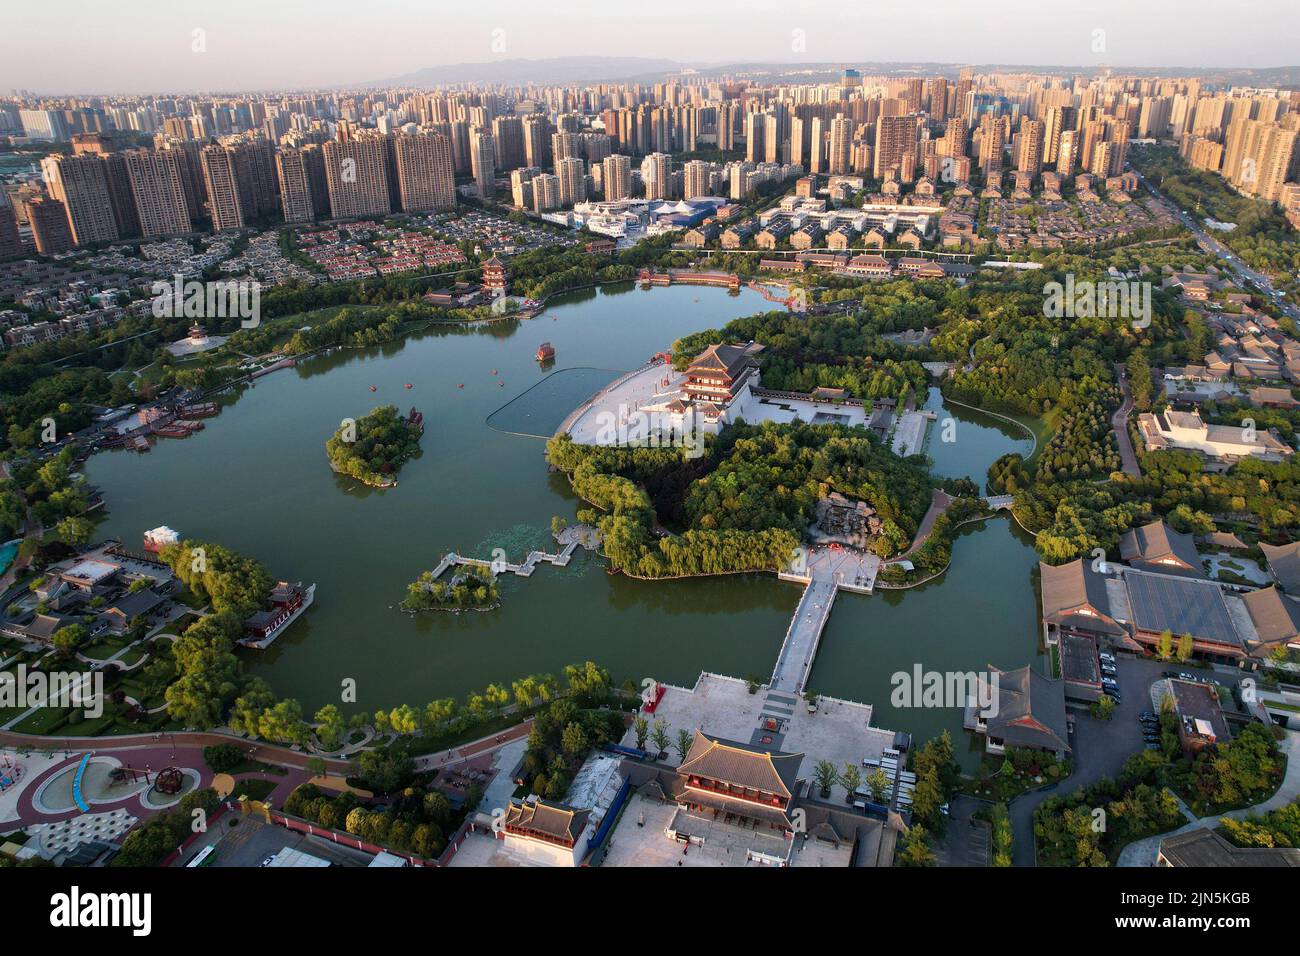 Xi'an. 15th June, 2022. Aerial photo taken on June 15, 2022 shows a view of the Tang Paradise, a large royal-garden-like theme park, in Xi'an, northwest China's Shaanxi Province. Credit: Shao Rui/Xinhua/Alamy Live News Stock Photo